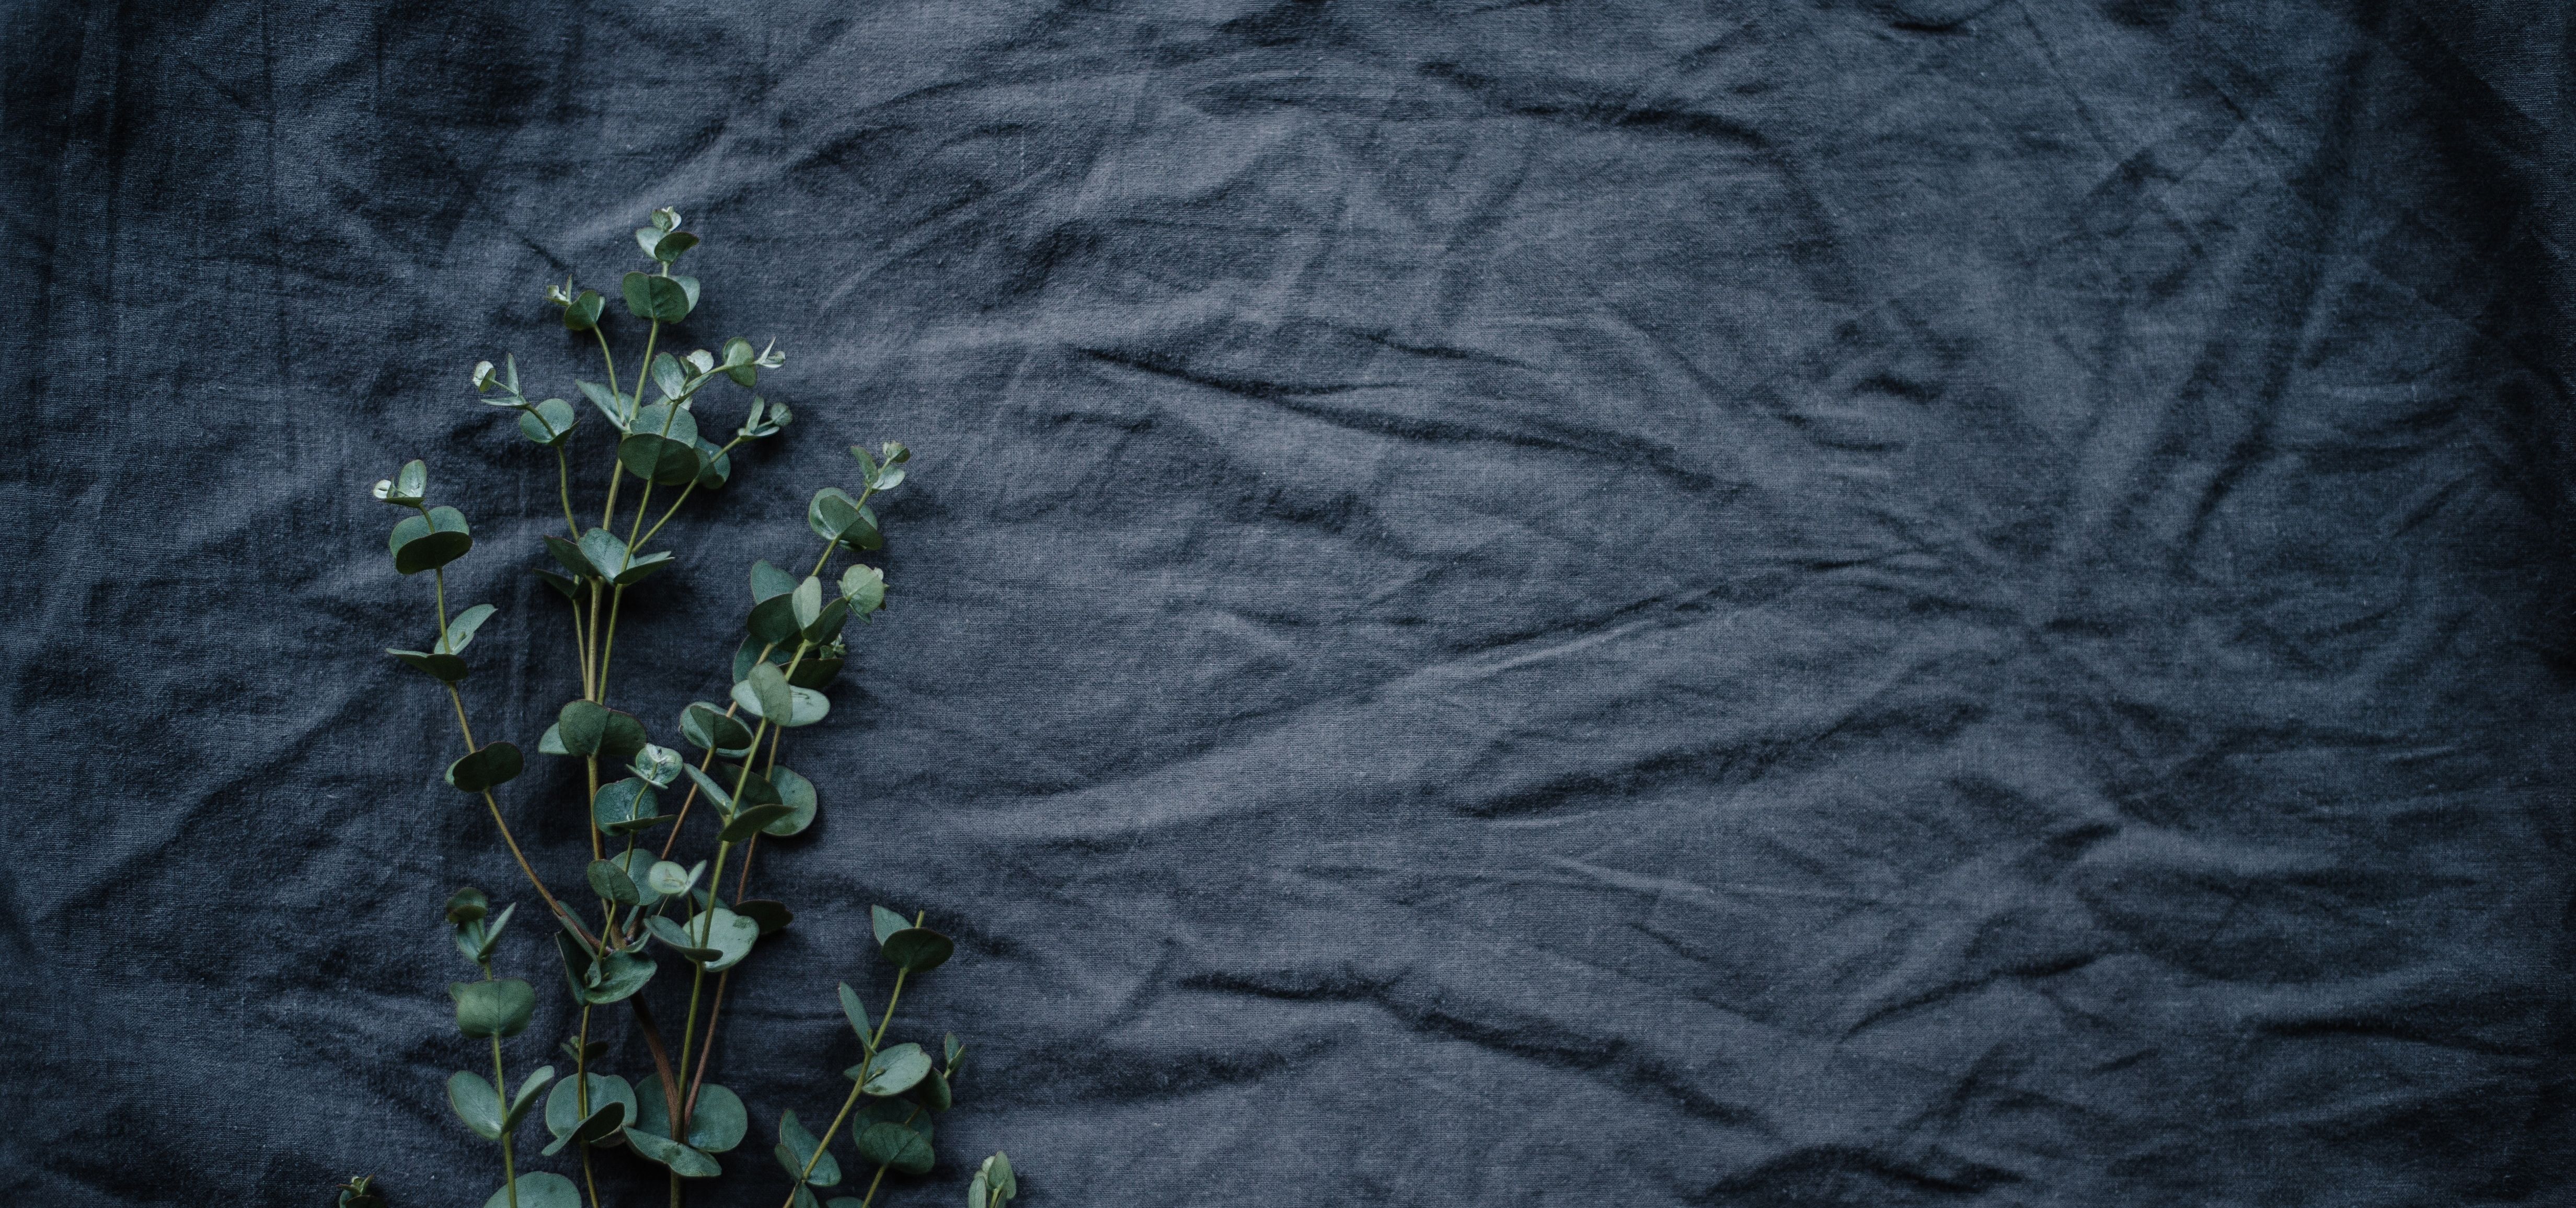 a plant laid on a gray fabric